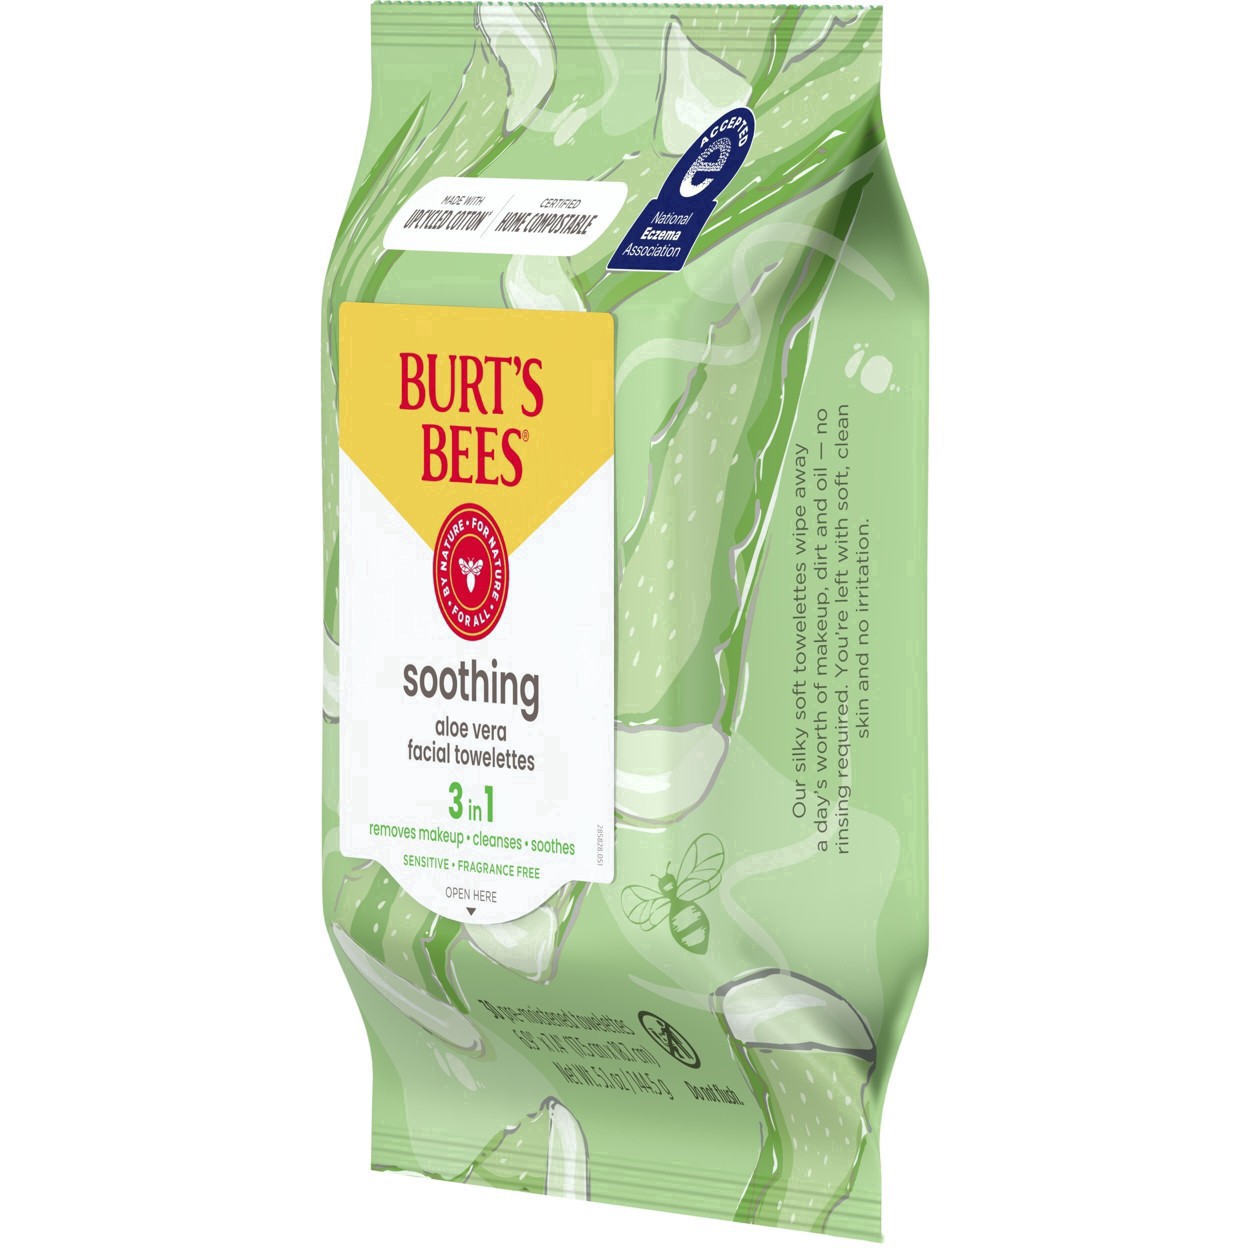 slide 56 of 137, Burt's Bees Soothing Facial Cleanser and Makeup Remover Towelettes with Aloe Vera for Sensitive Skin, Made with Upcycled Cotton, 30 Count, 30 ct